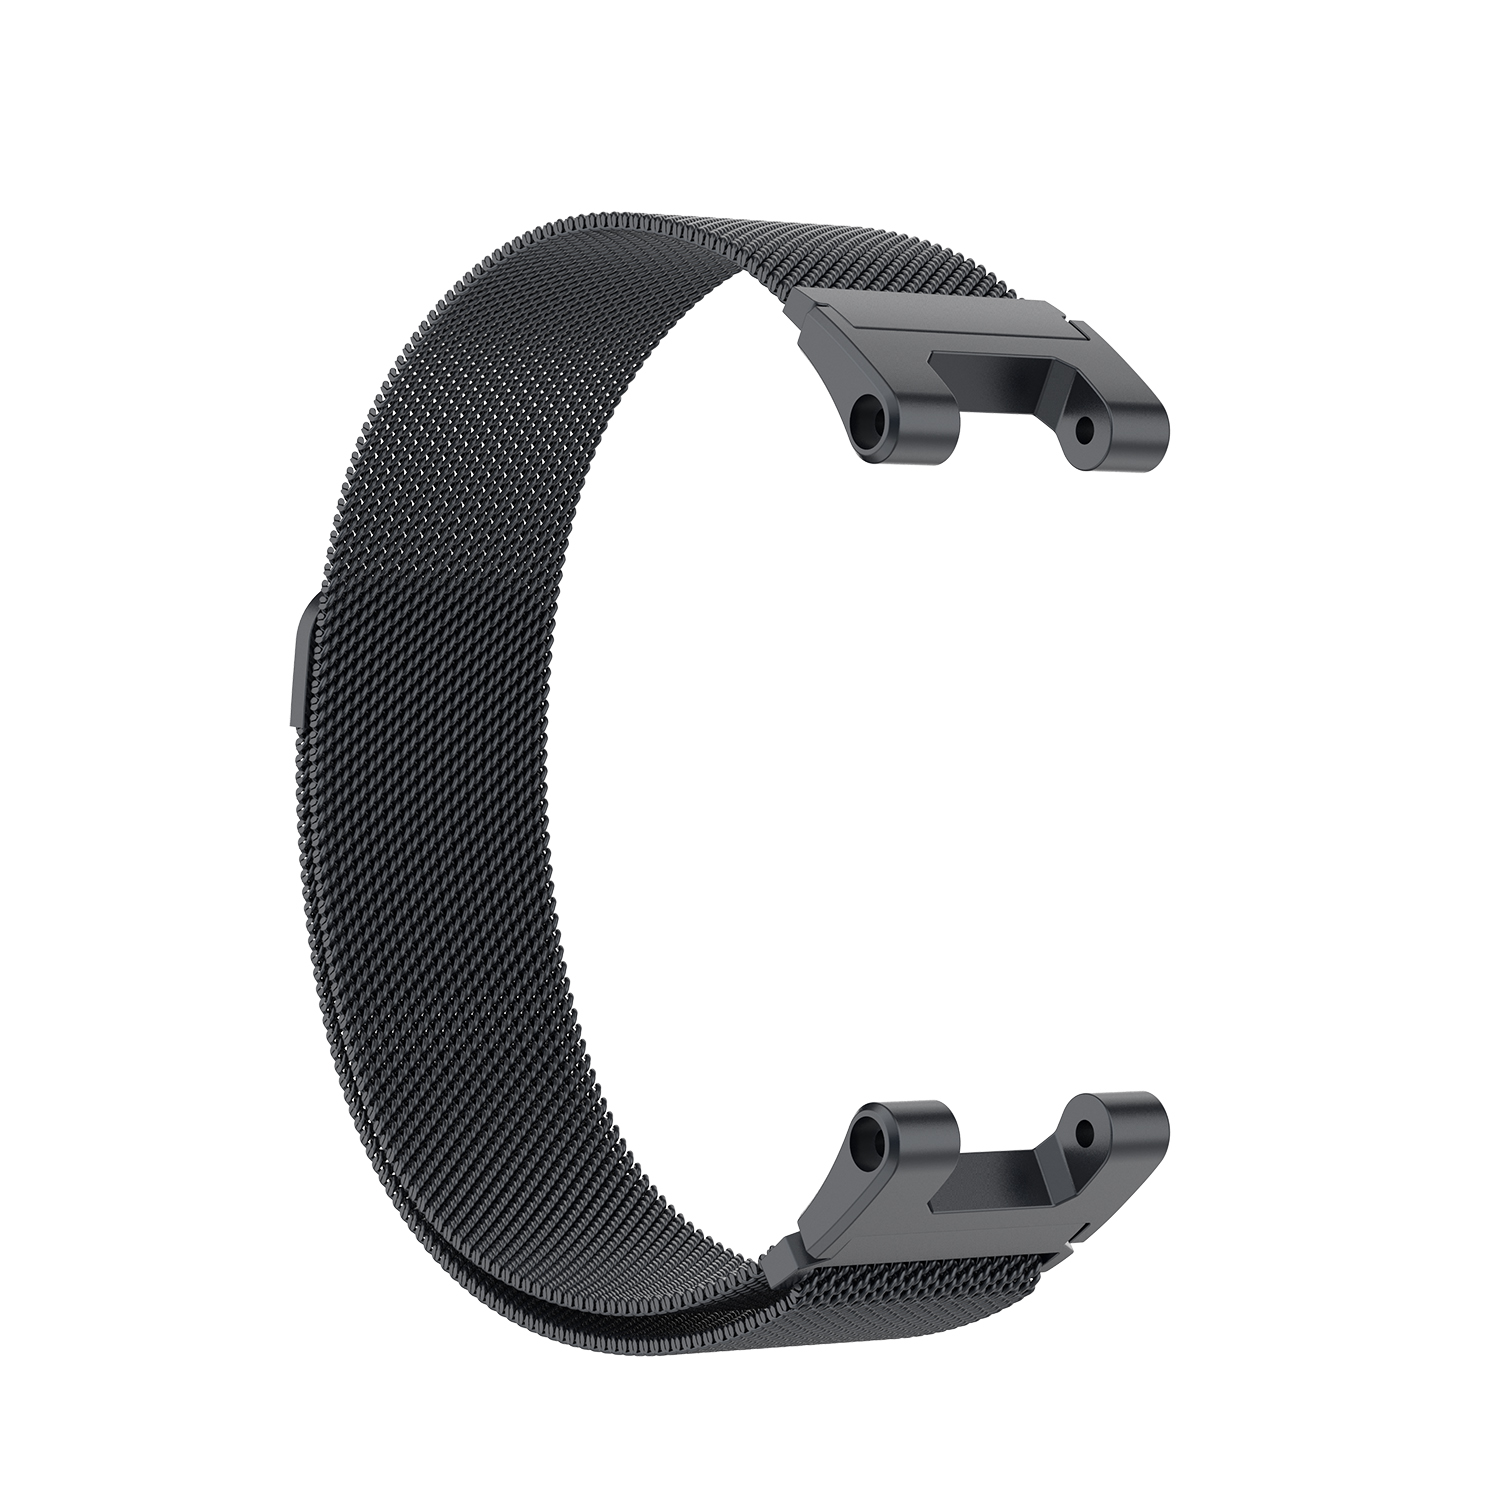 Bakeey-Milanese-Stainless-Steel-Strap-Watch-Band-Watch-Strap-Replacement-for-Amazfit-Ares-1748296-17